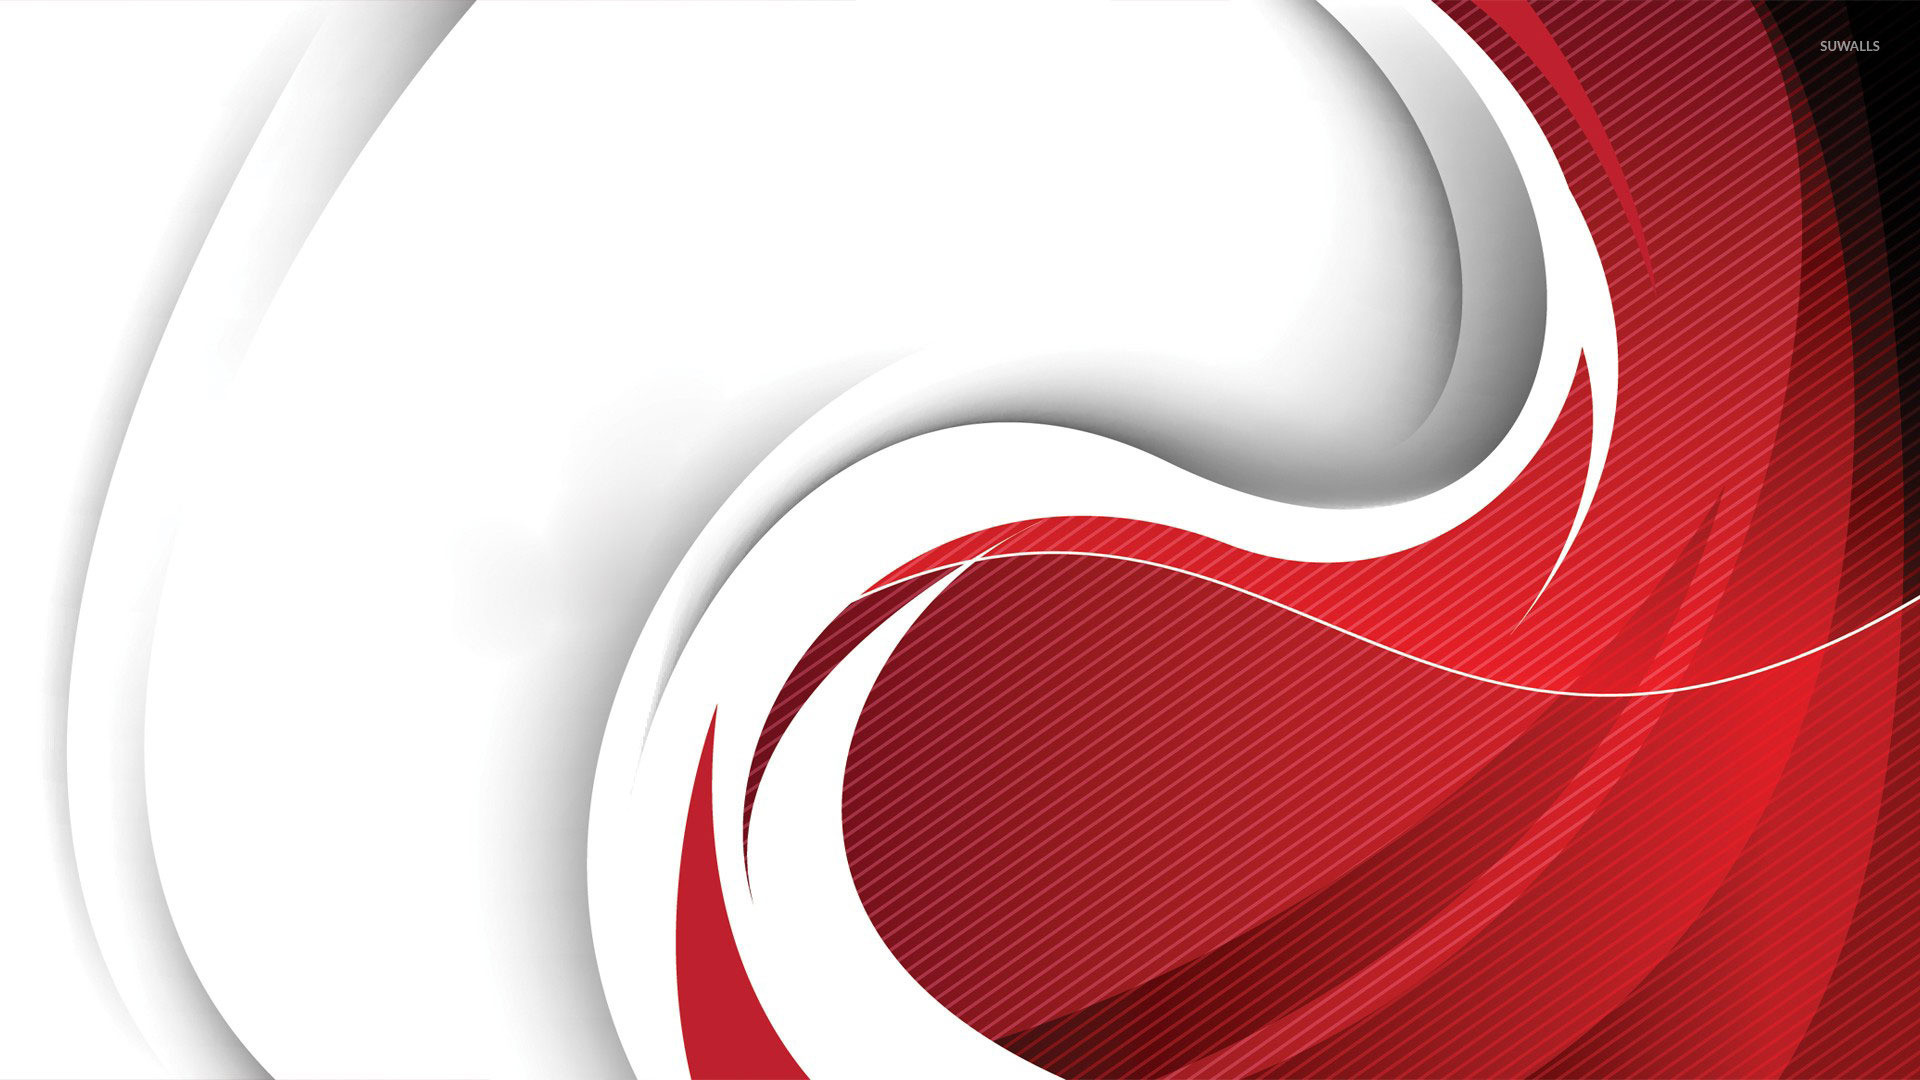 1920x1080 Red and white swirl wallpaper